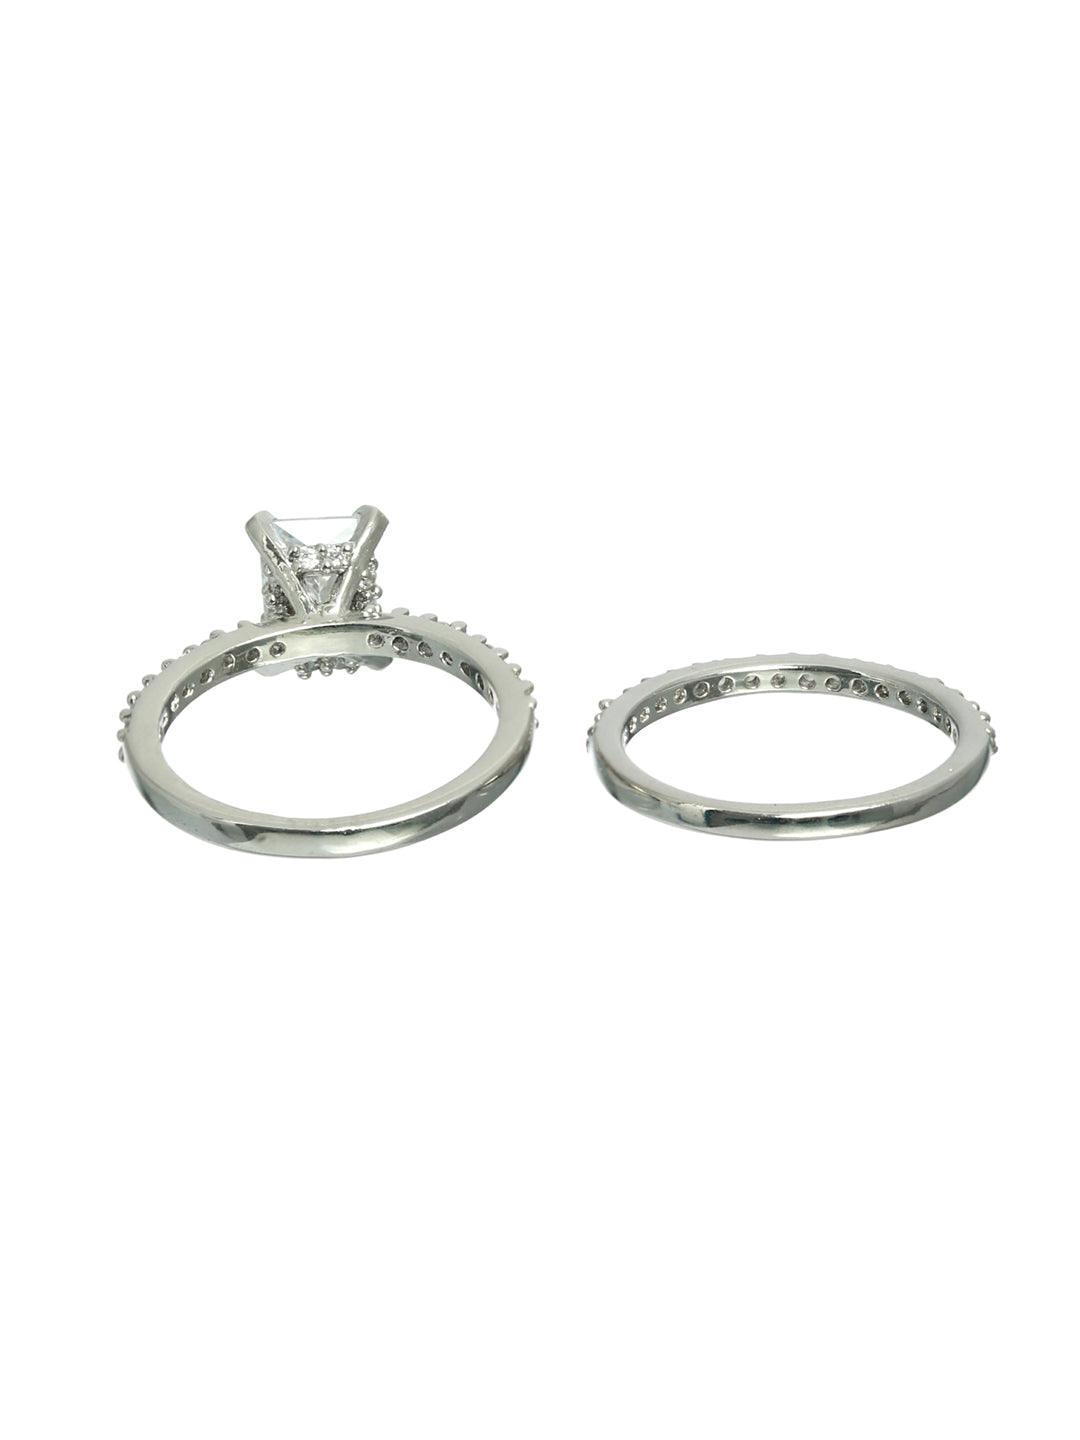 Women's Silver Plated CZ studded Solitaire Stack Rings - Jazz and Sizzle - Indiakreations